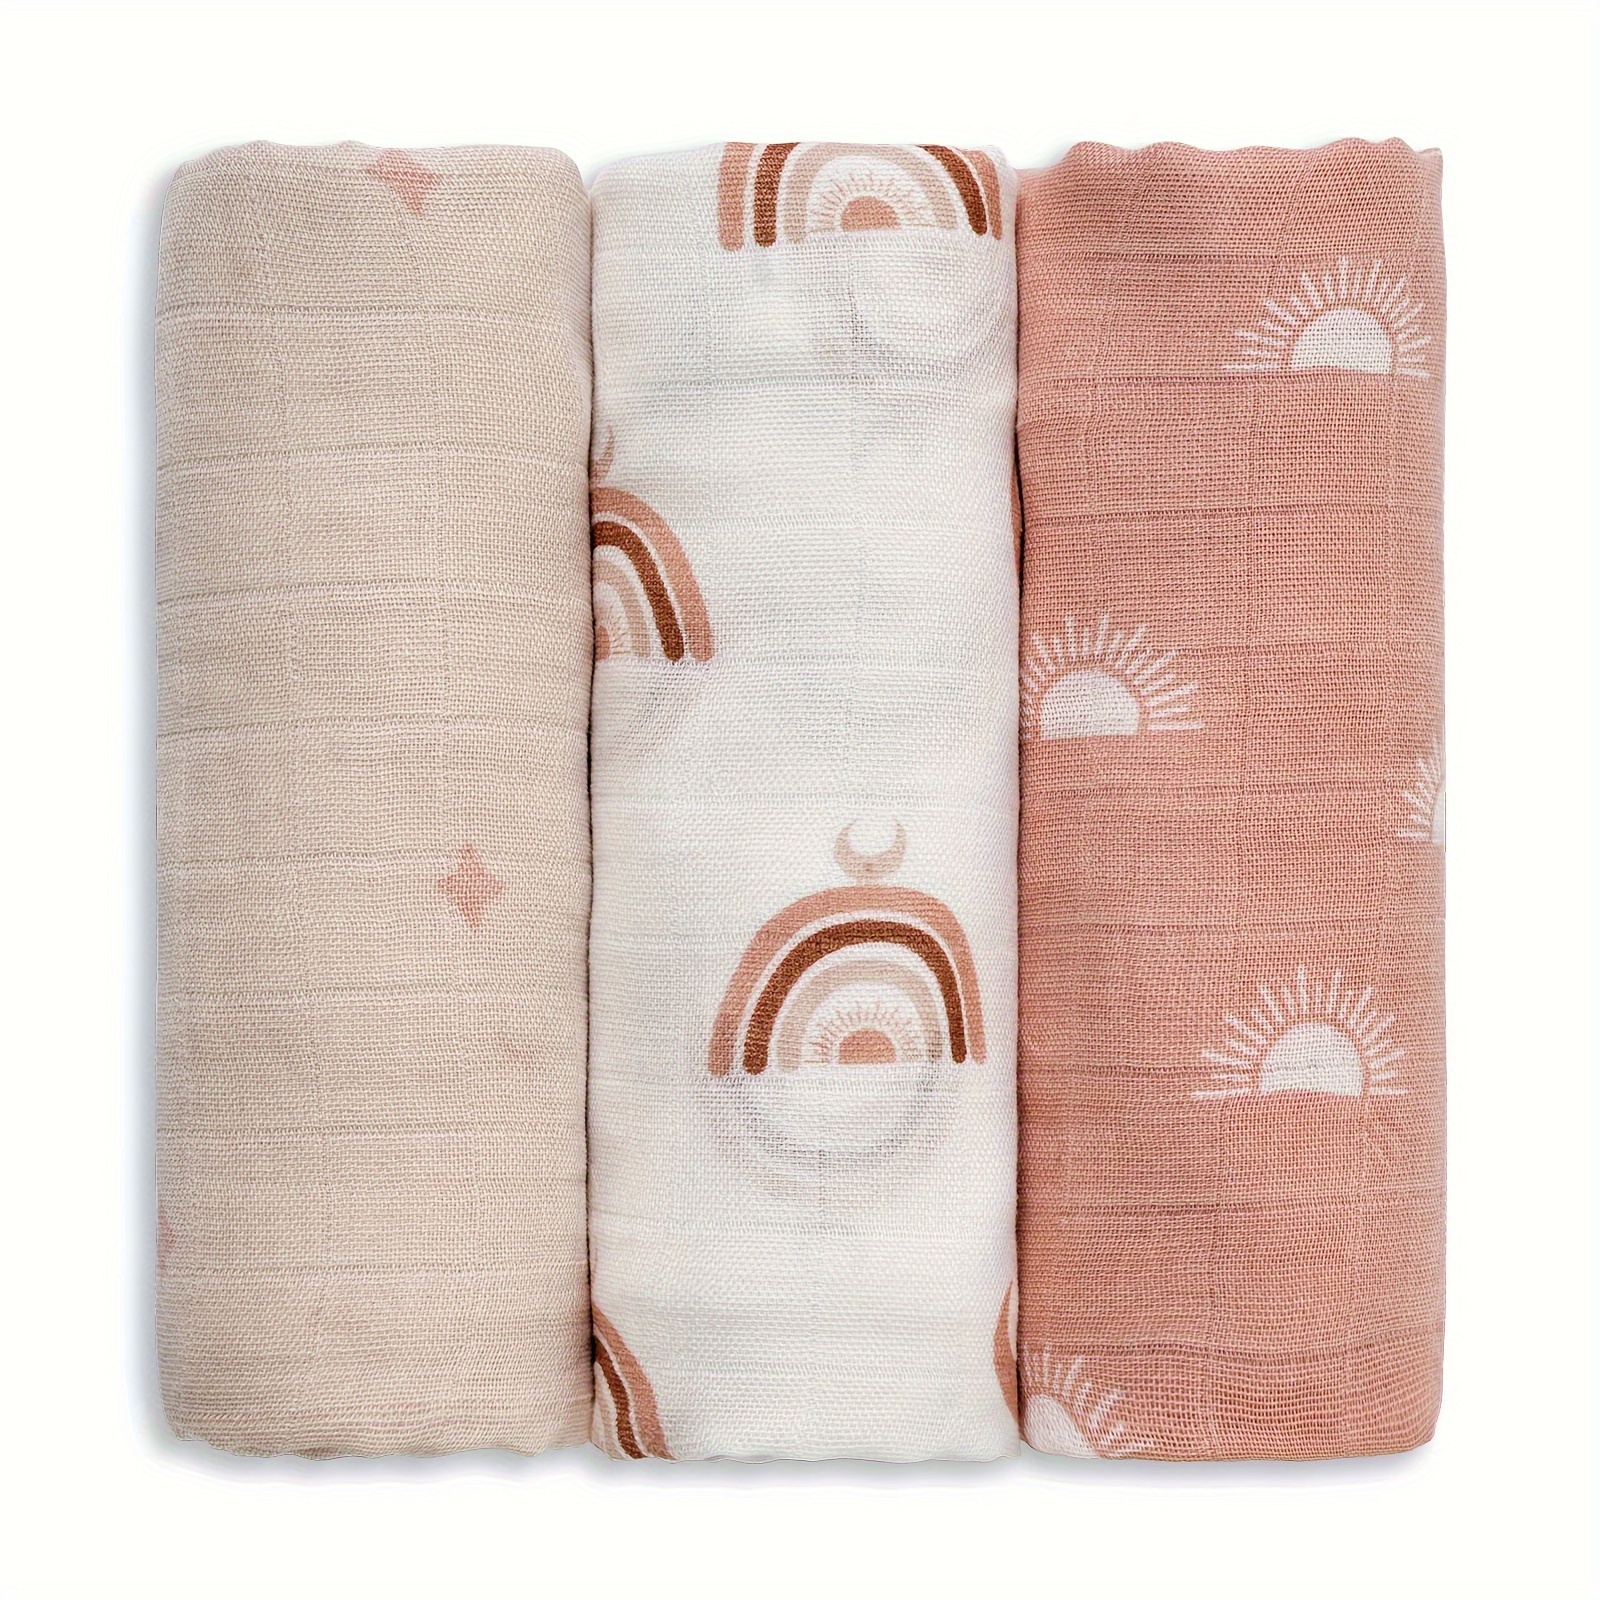 

Bamboo Fiber Baby Muslin Swaddle Blankets 3-pack, Soft Breathable Gauze Handkerchief, Machine Washable, Multi-use Nursing Cover, Burp Cloth For Newborn To 3 Years - 70x70cm